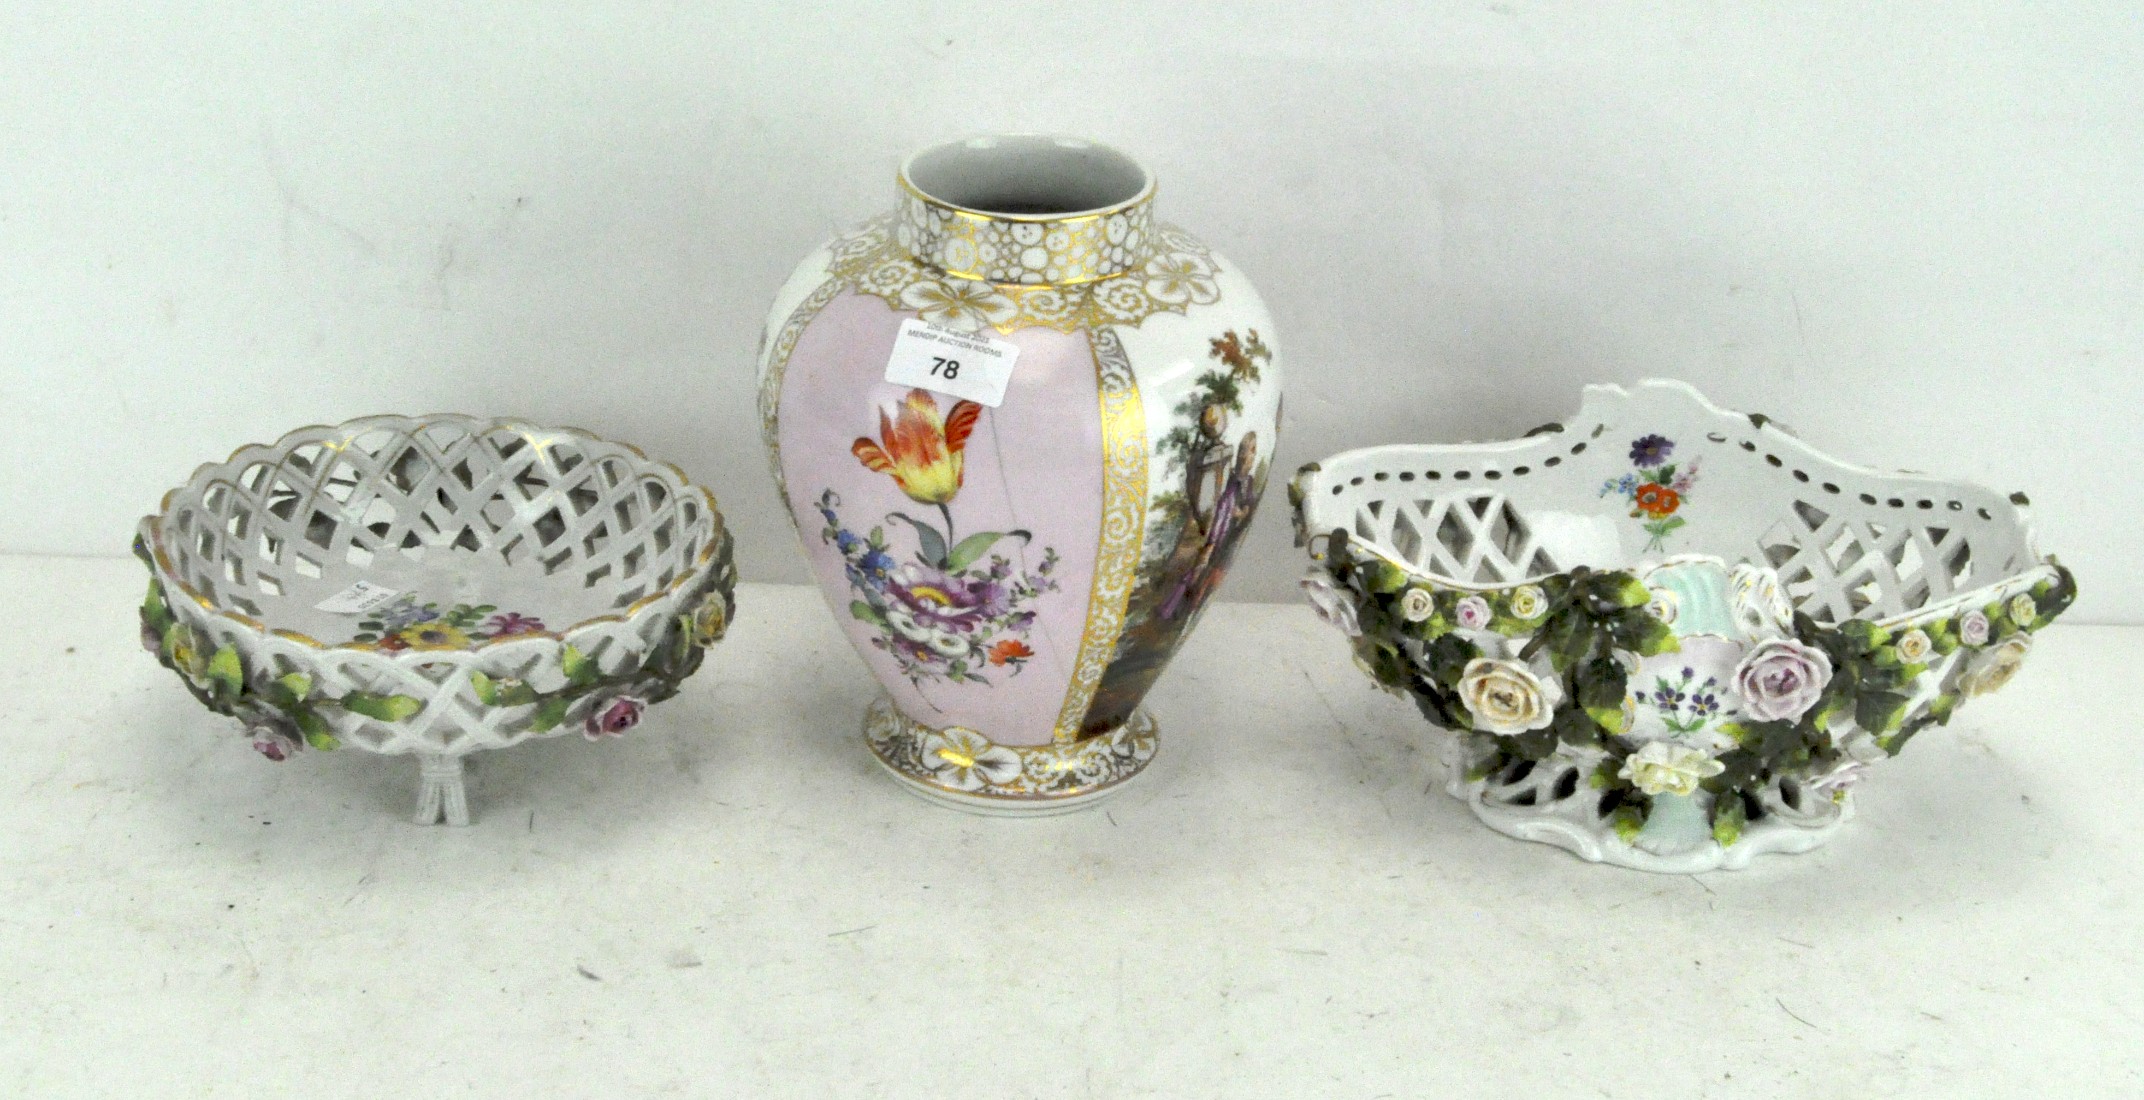 A Dresden porcelain oviform vase, circa 1900 and other items